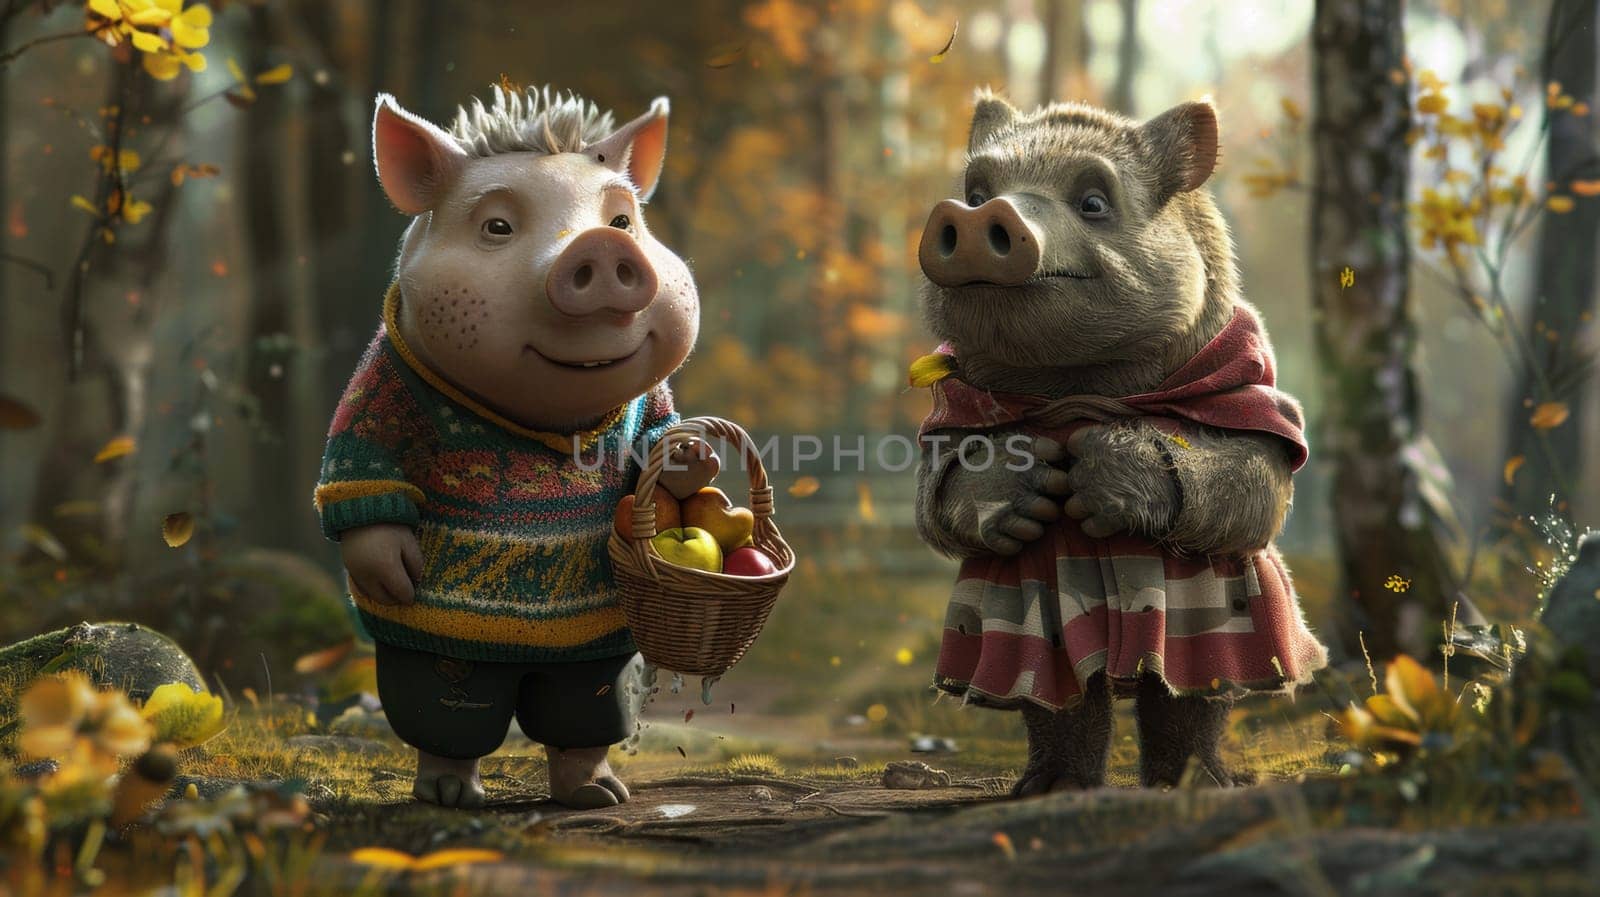 Two pigs are standing next to each other in a forest